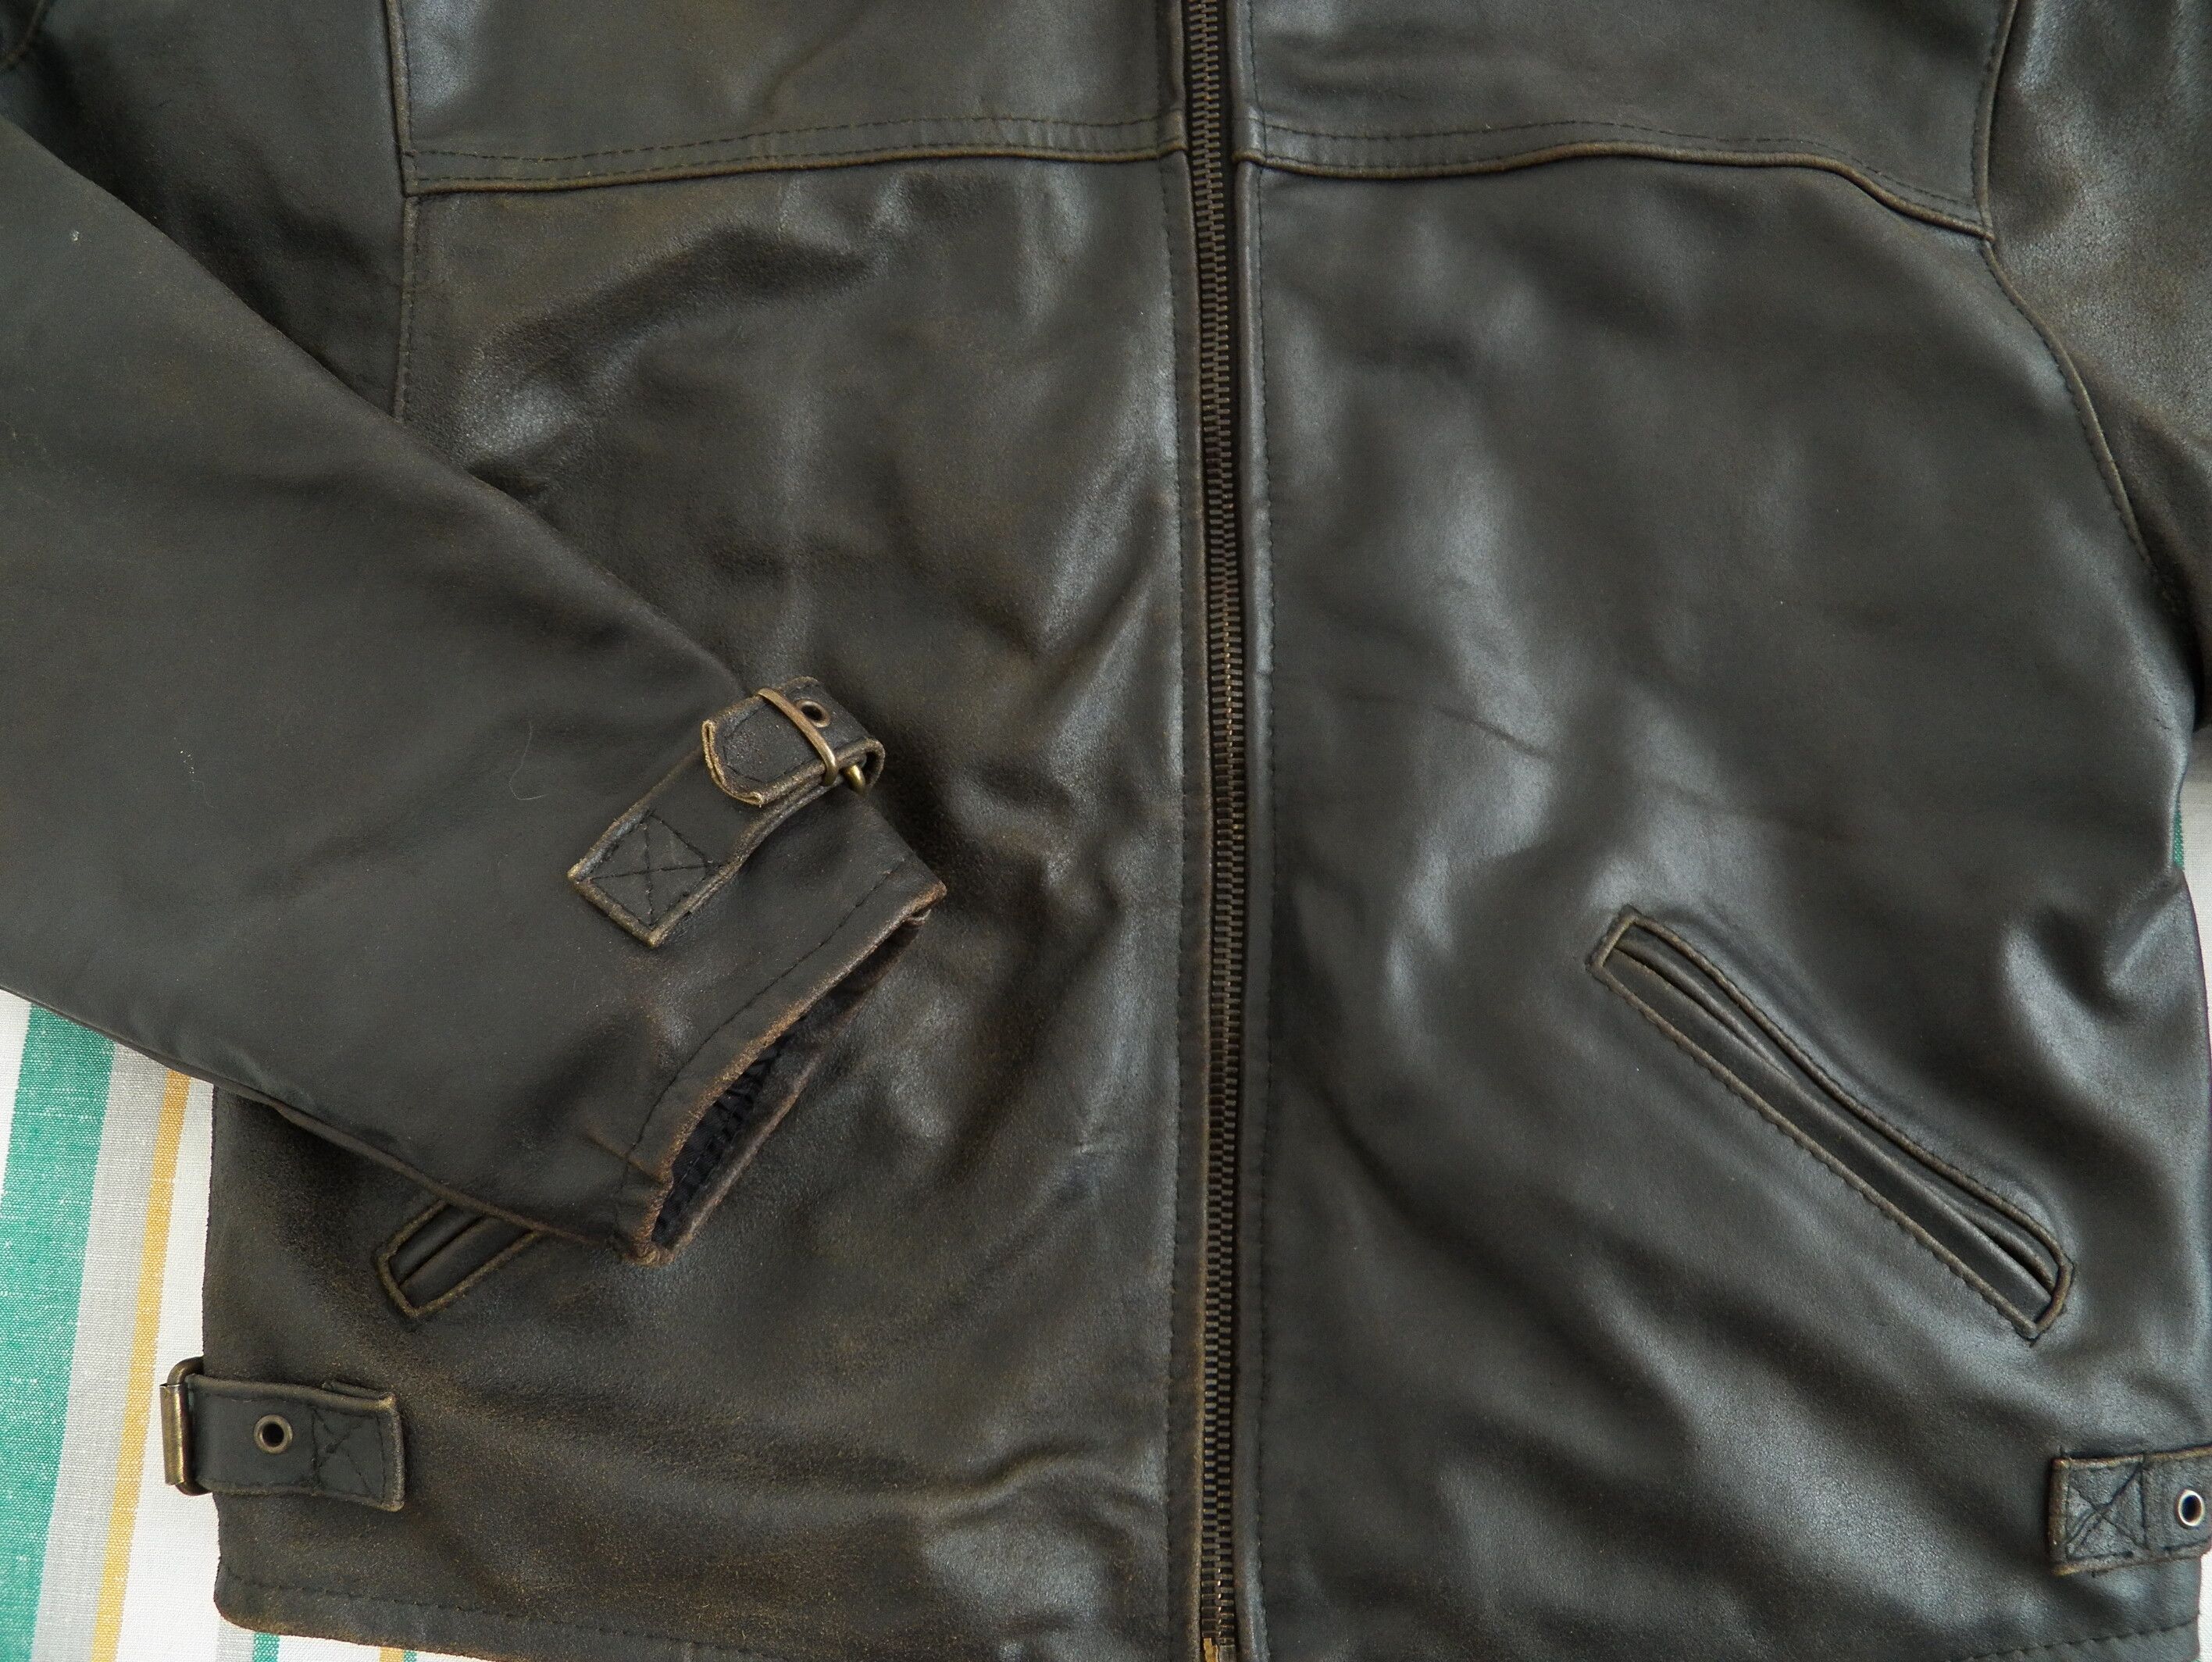 Vintage Firenze 1957 Vintage Raw Leather Jacket Brown Small Size US S / EU 44-46 / 1 - 2 Preview